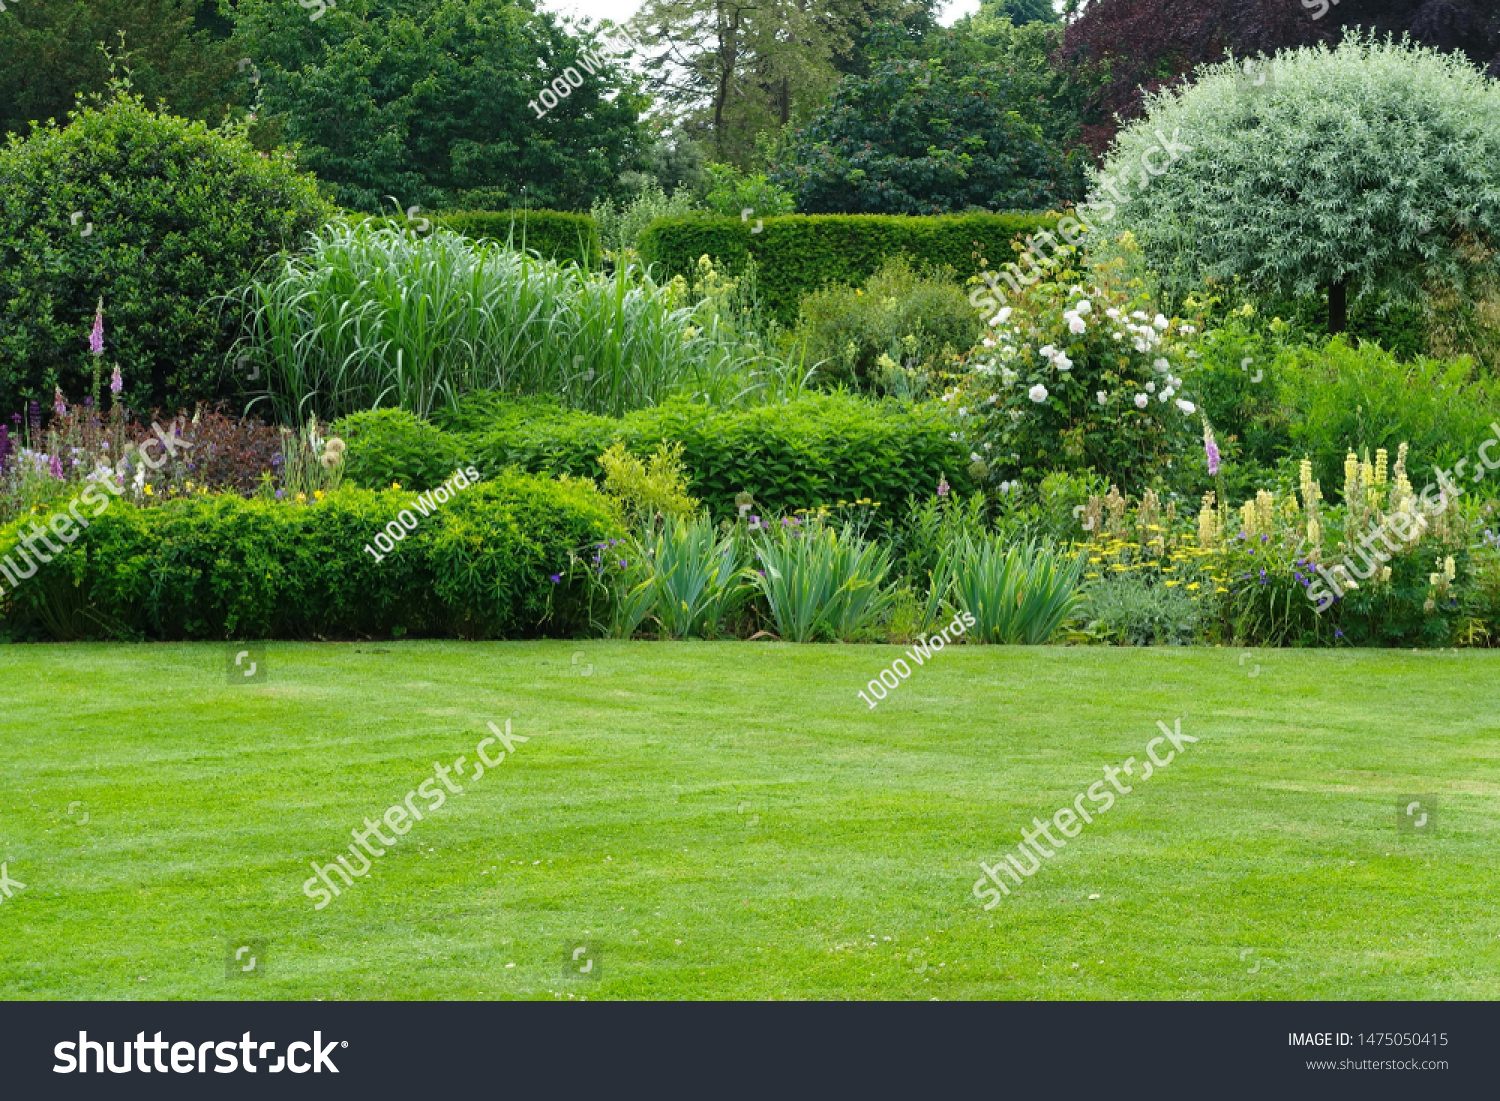 Scenic Summertime View of a Beautiful English Style Landscape Garden with a Green Mowed Lawn, Leafy Trees and Colourful Flower Bed #1475050415